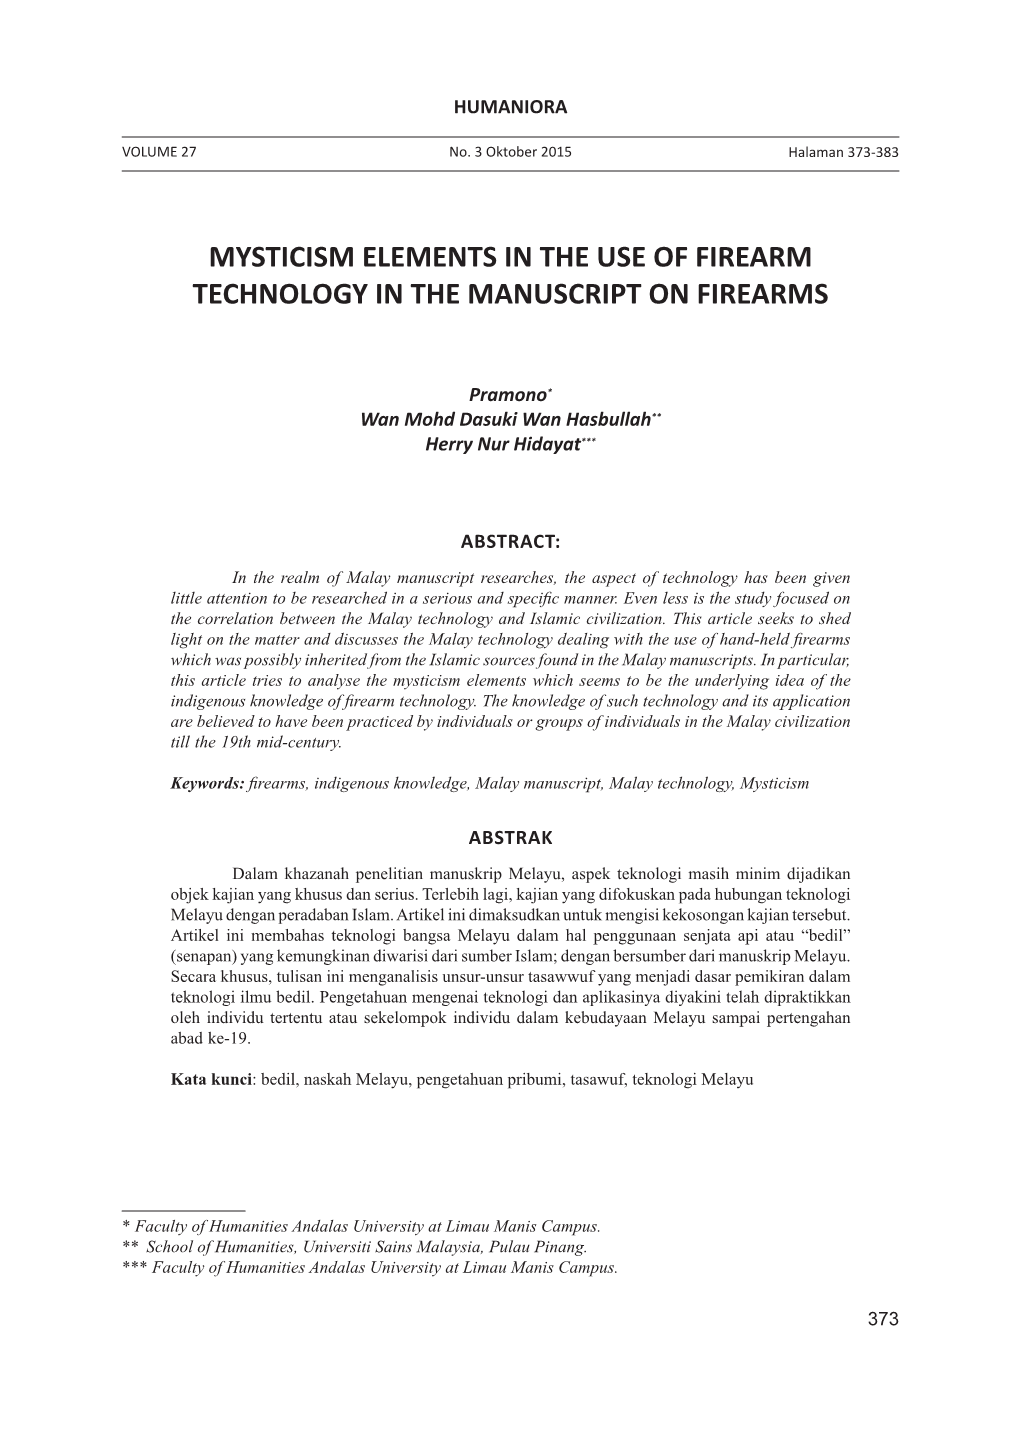 Mysticism Elements in the Use of Firearm Technology in the Manuscript on Firearms